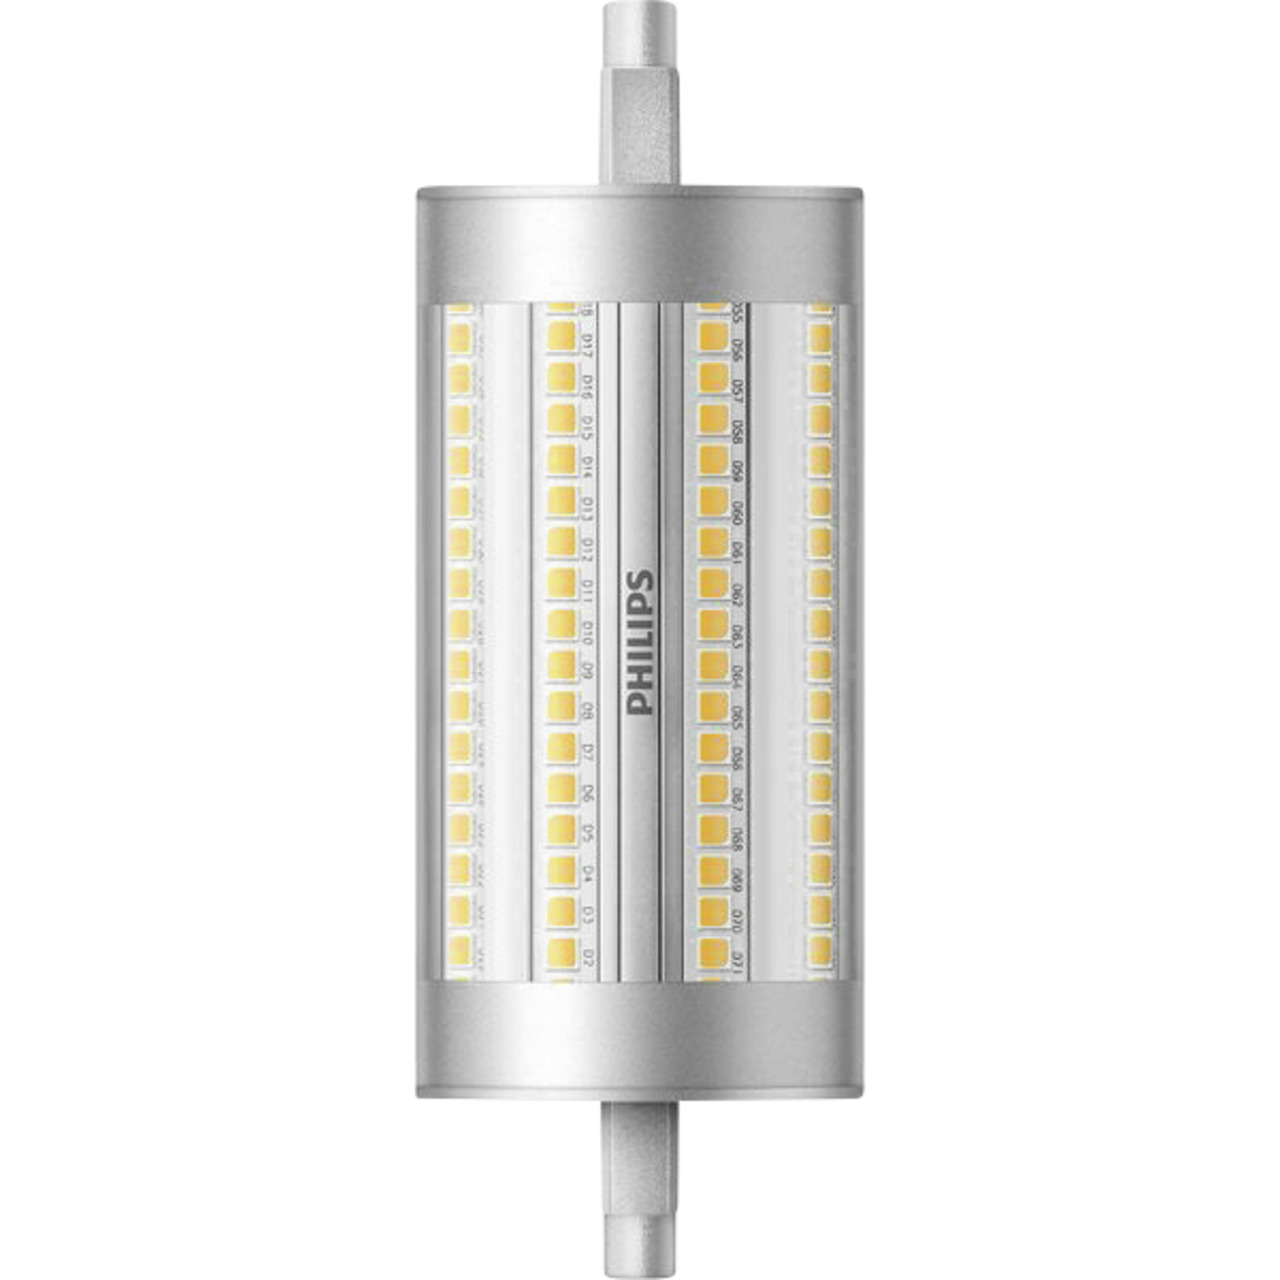 Philips CorePro LED 17-5-W-R7s-LED-Lampe- 118 mm- warmweiss- dimmbar